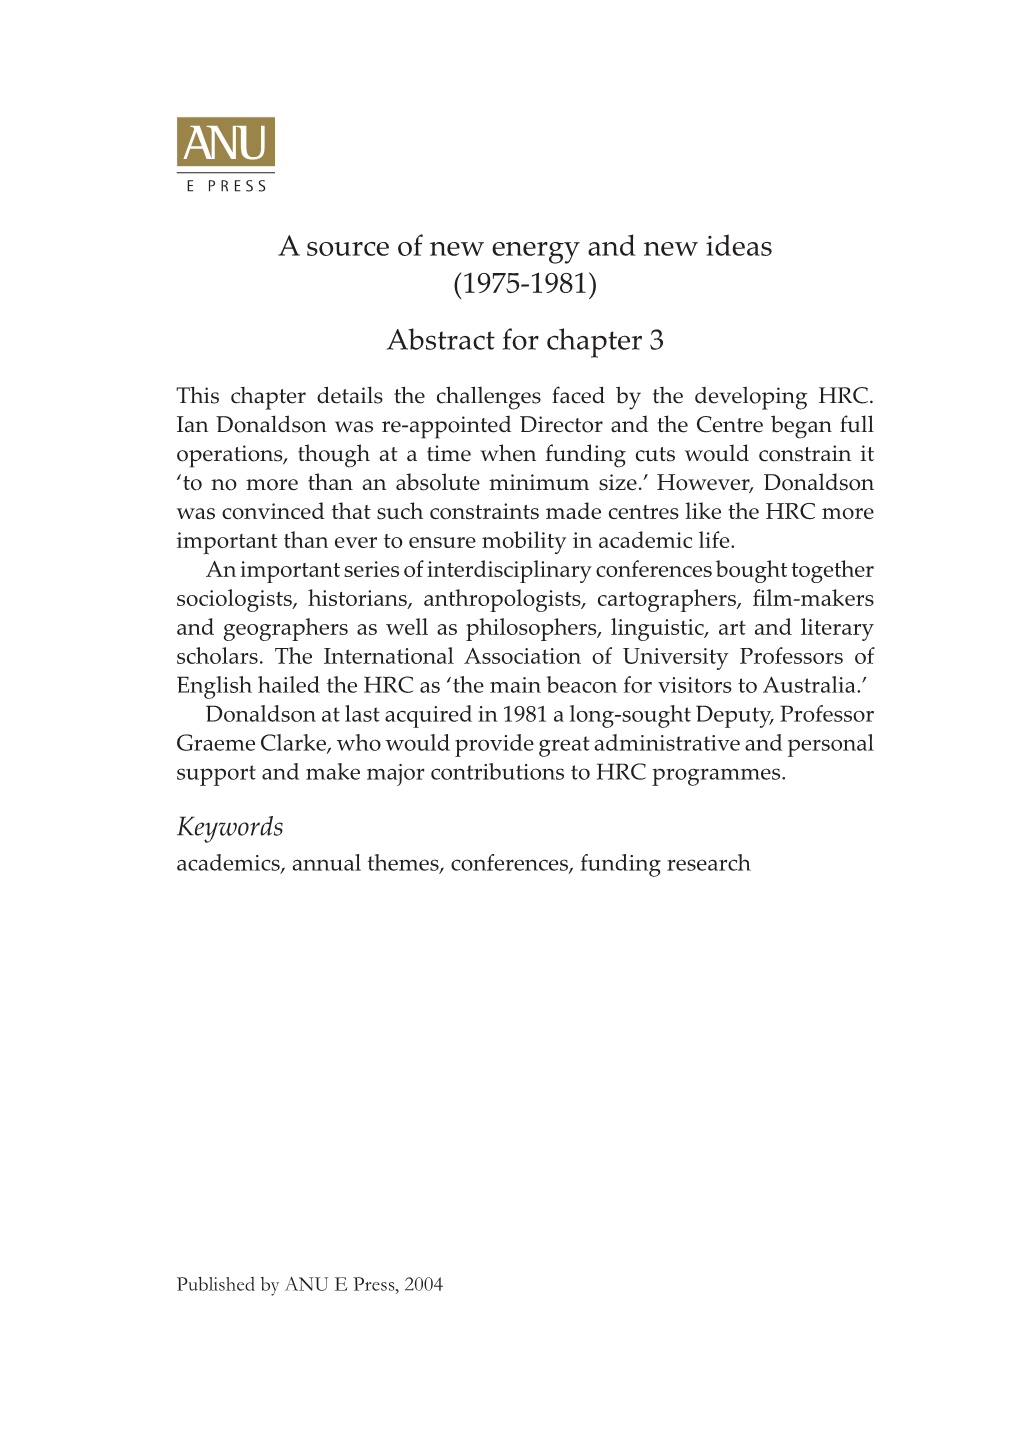 A Source of New Energy and New Ideas (1975-1981) Abstract for Chapter 3